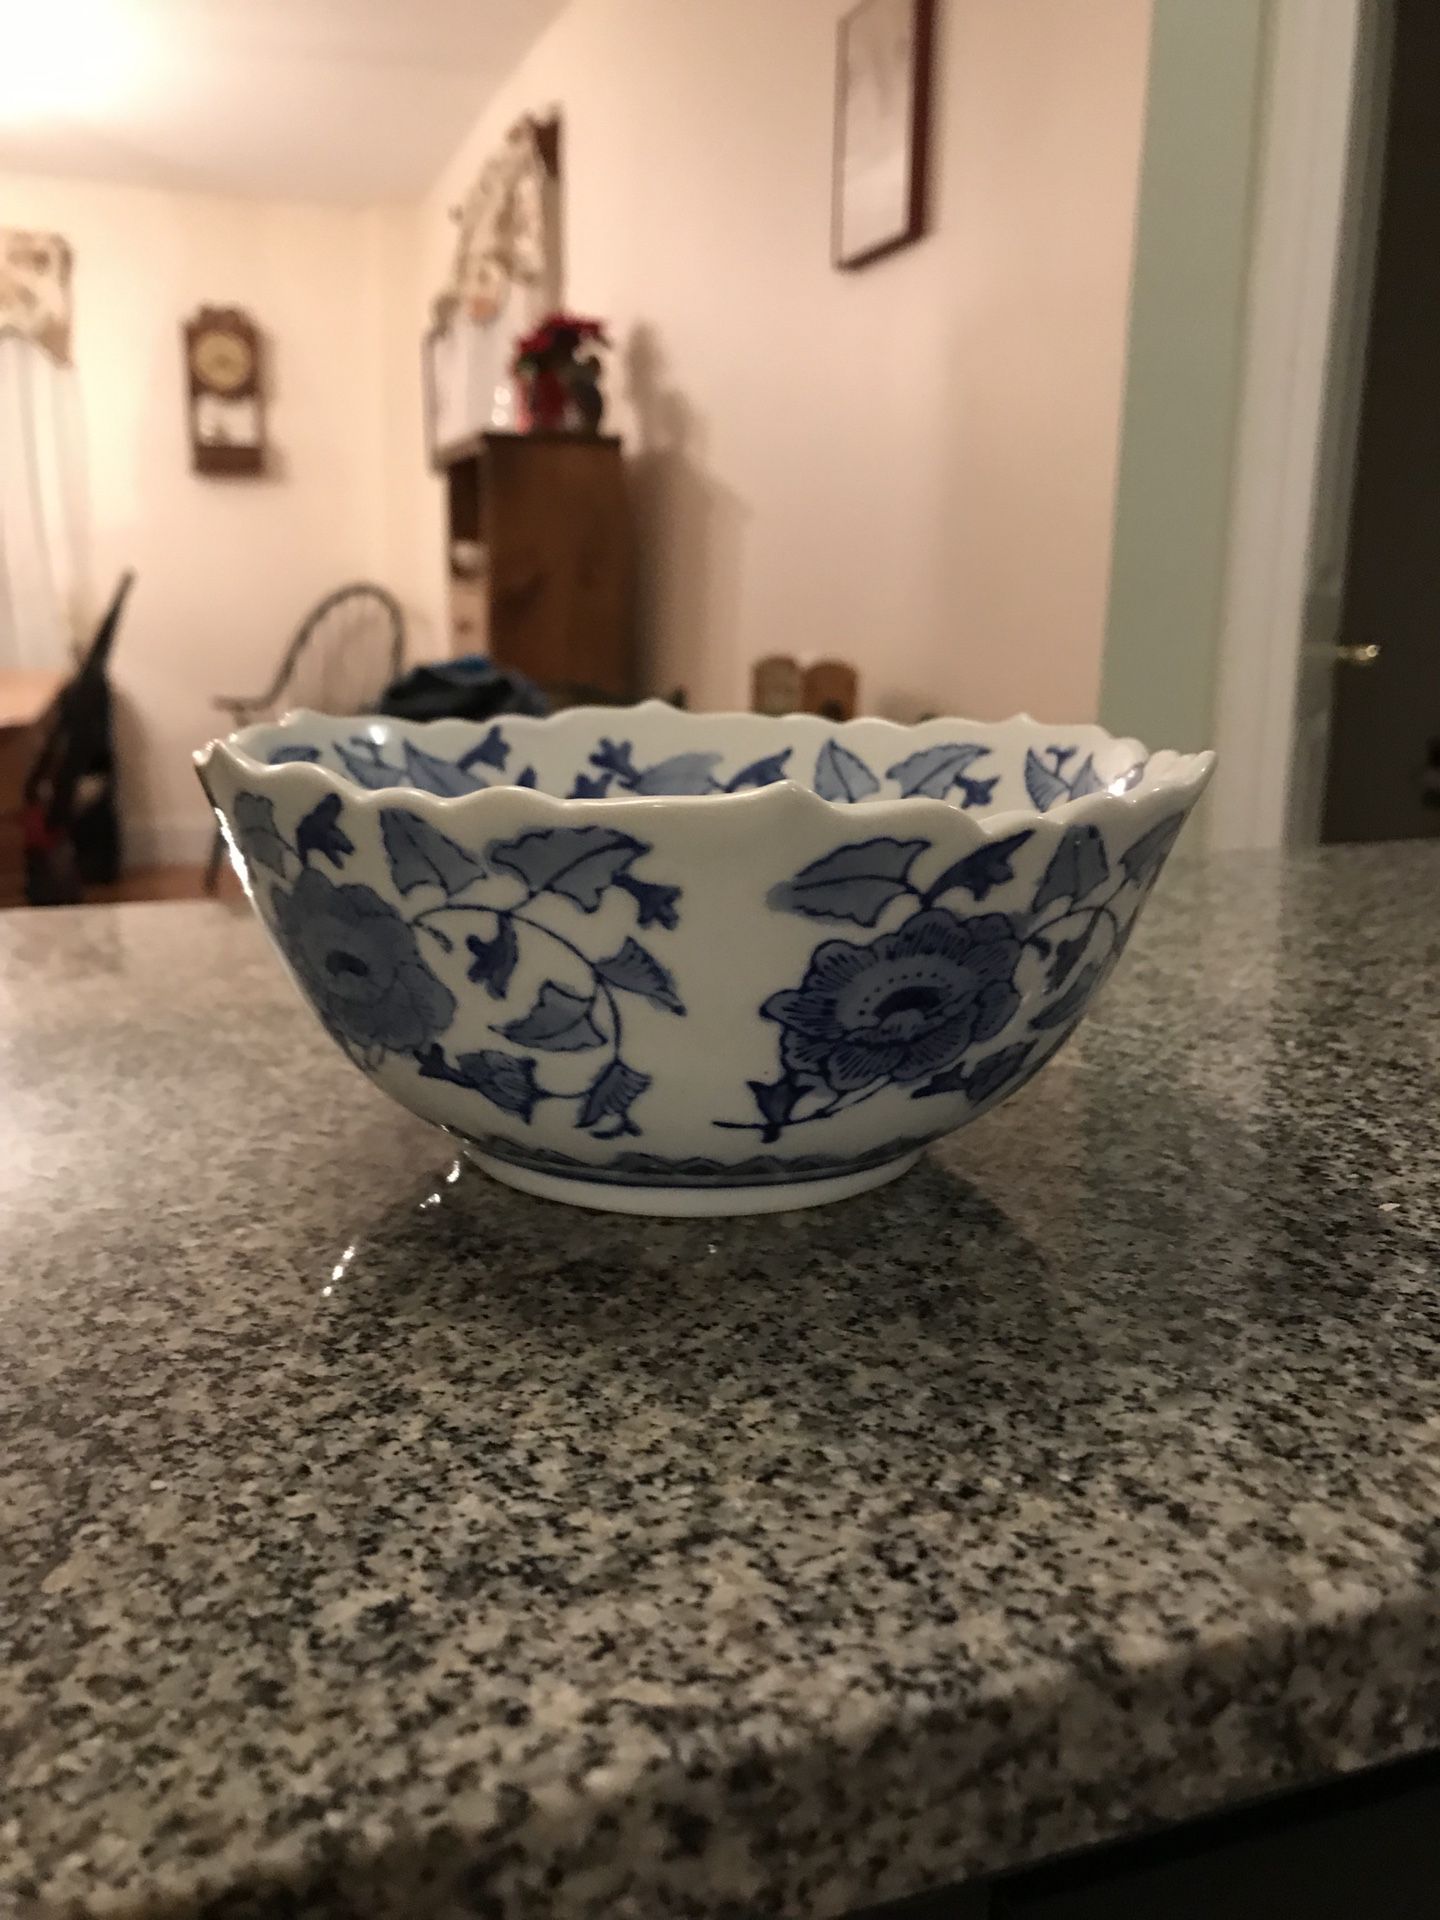 7” wide, 3.5 “ tall. Blue and white Japanese looking bowl.